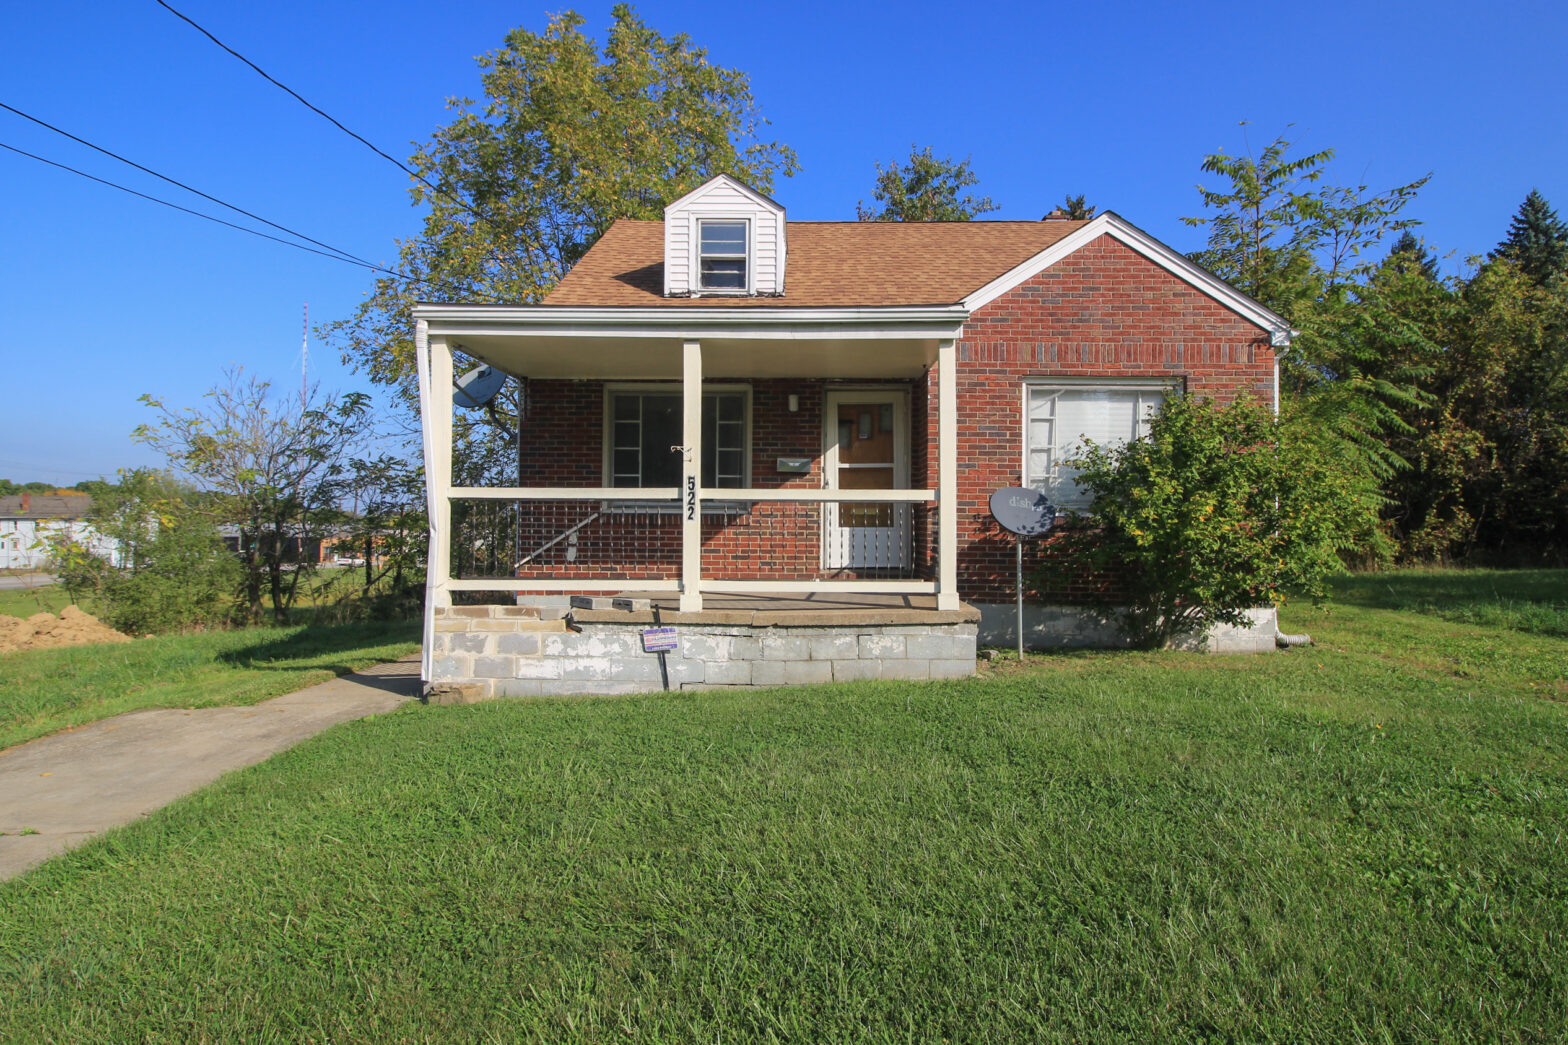 House For Sale | Youngstown, OH 44502